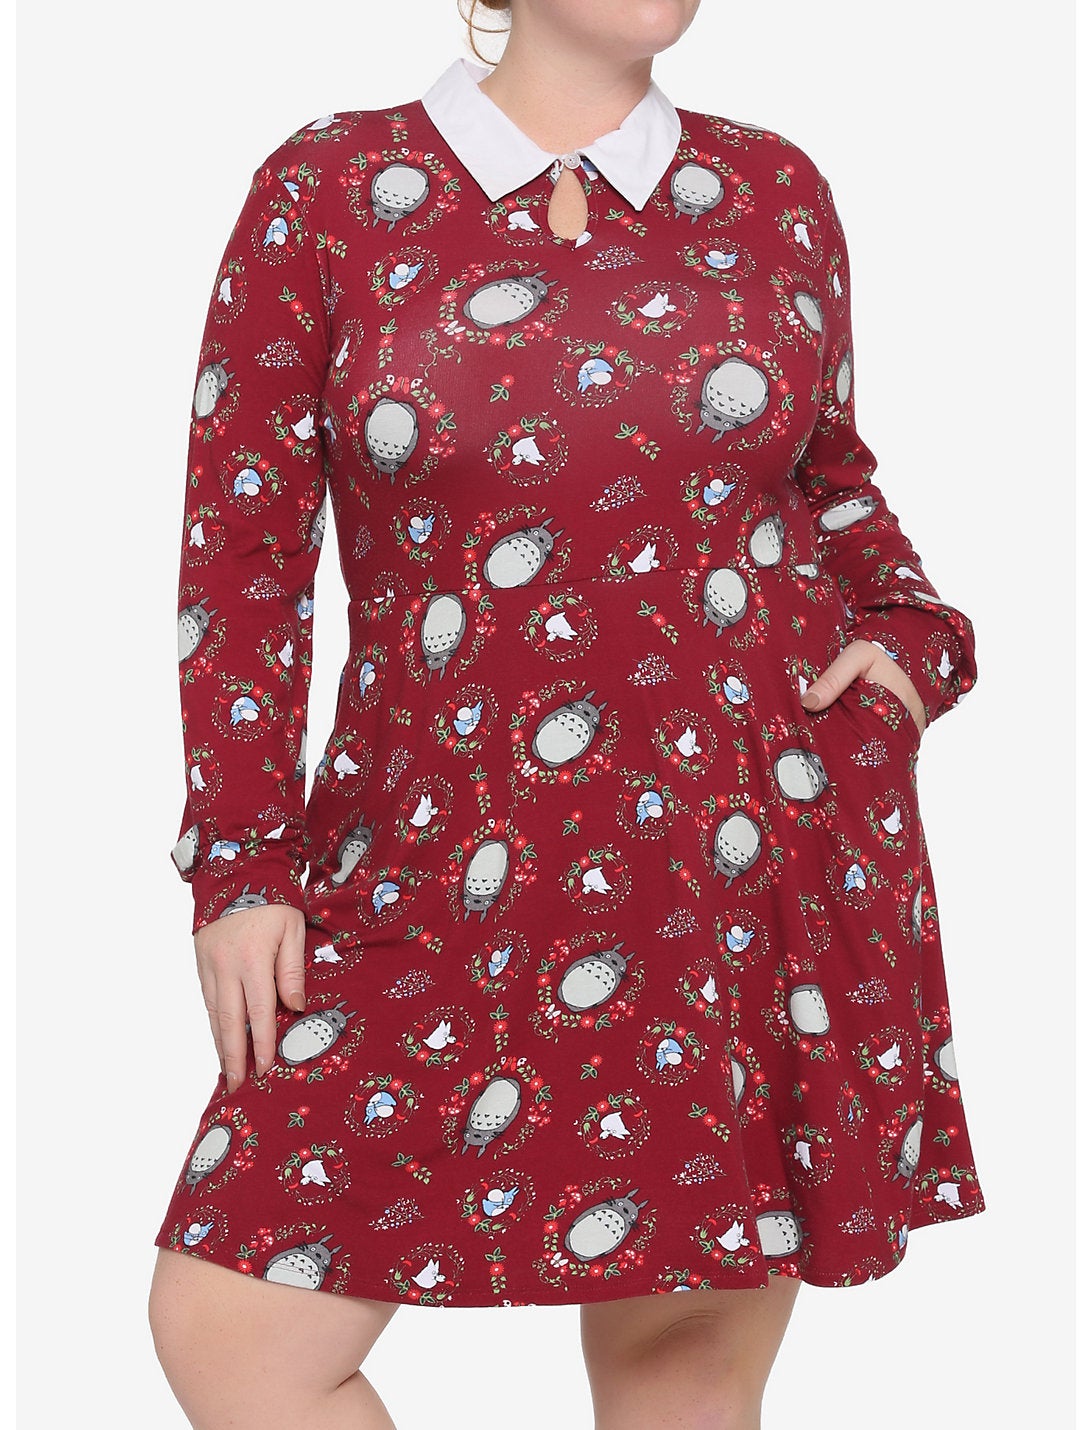 model in red long sleeve collared dress with flower and totoro print